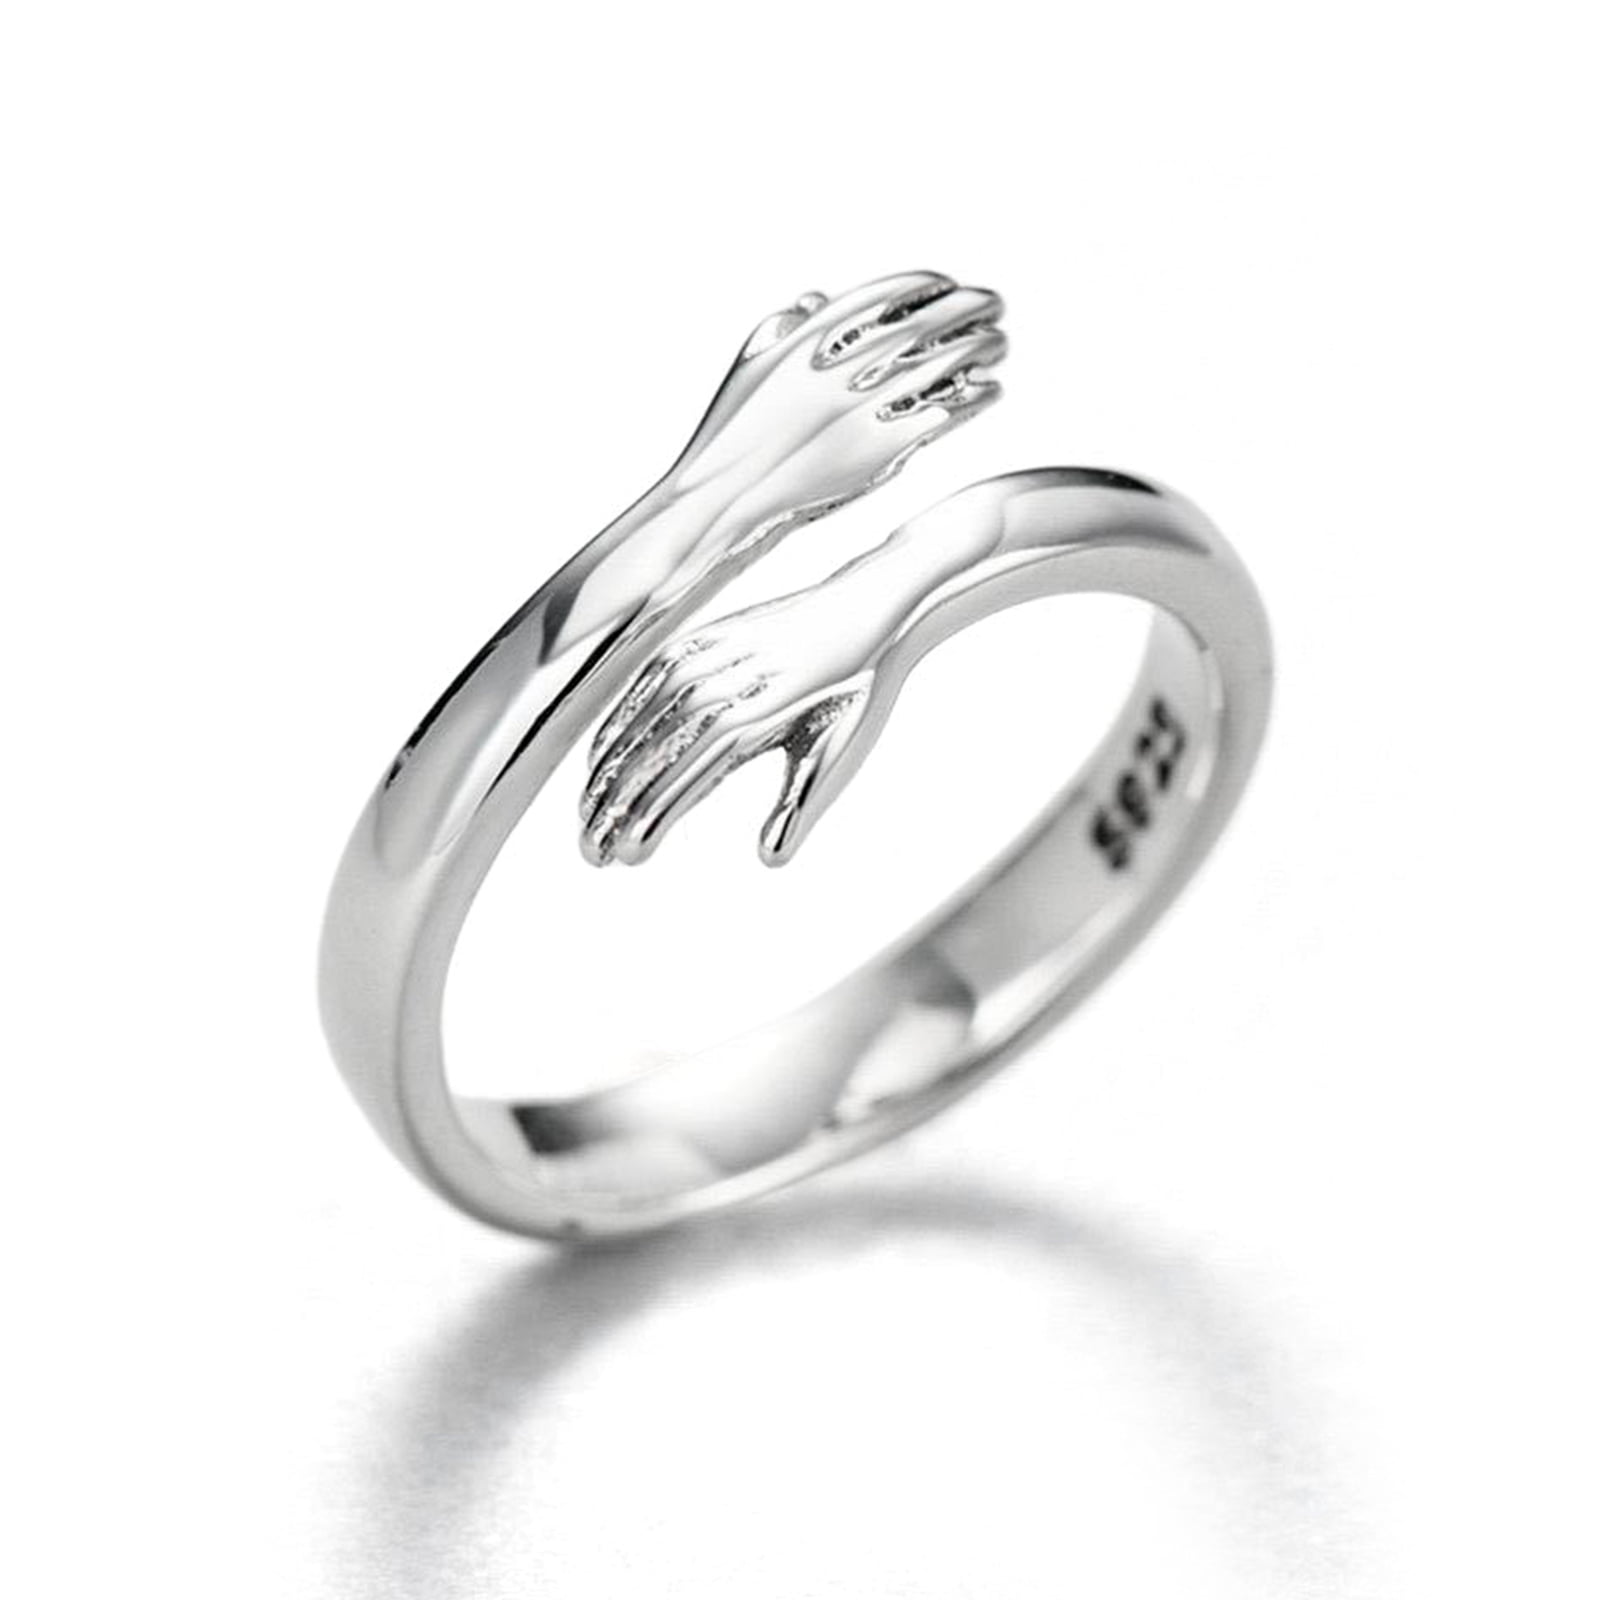 HOLDING HAND RING (925 PURE SILVER) – Au Revoir - Your Charm Is Waiting